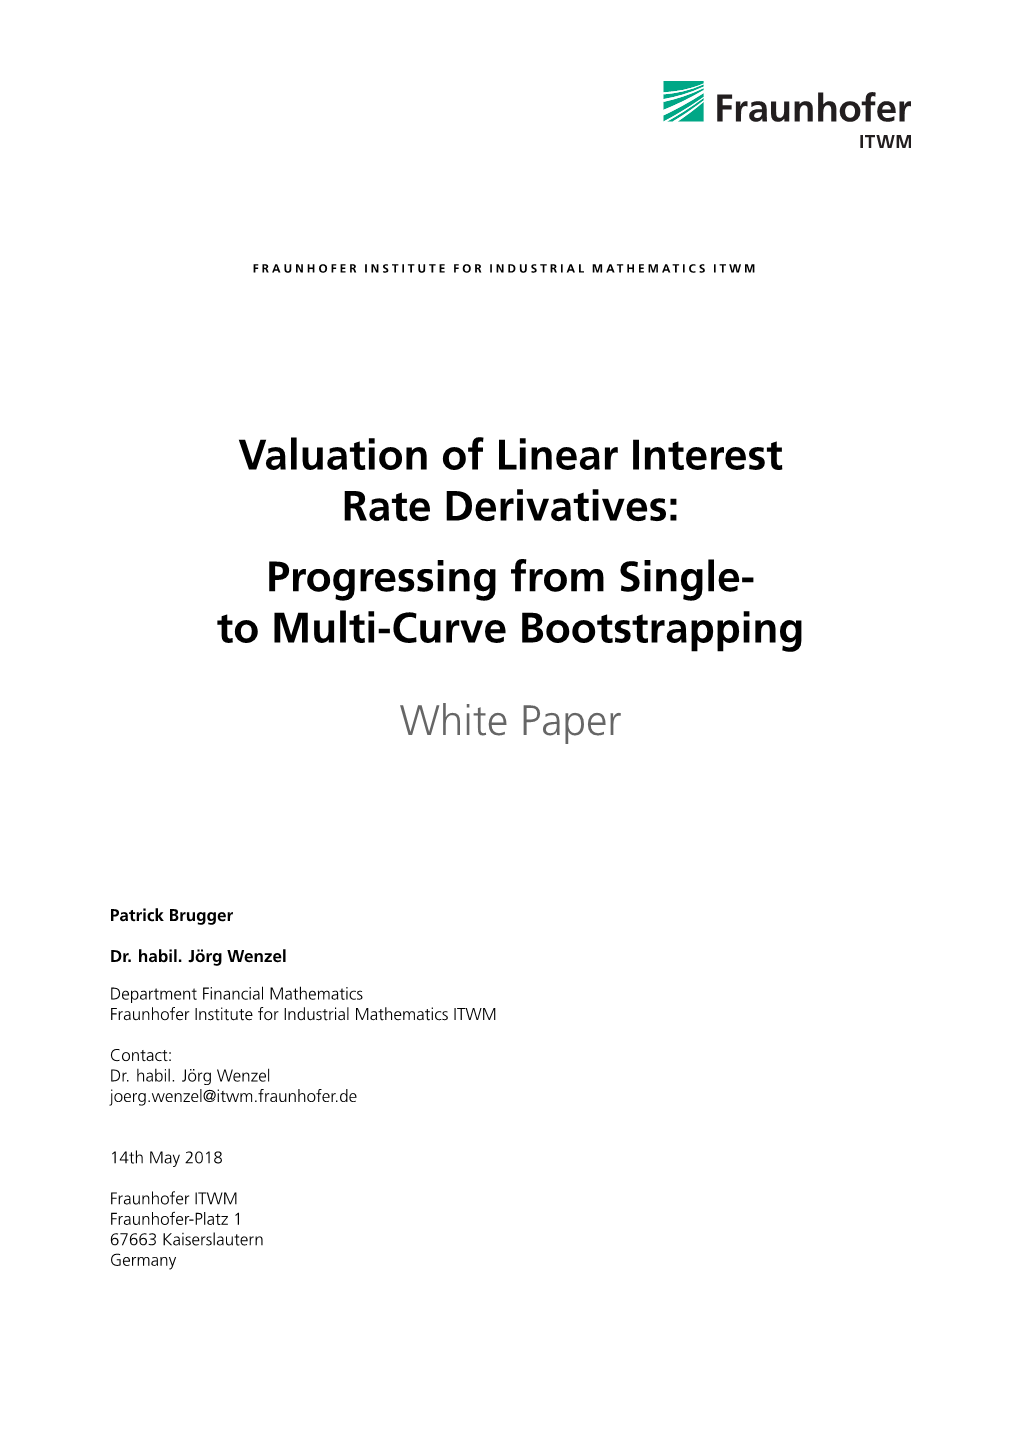 Valuation of Linear Interest Rate Derivatives: Progressing from Single- to Multi-Curve Bootstrapping